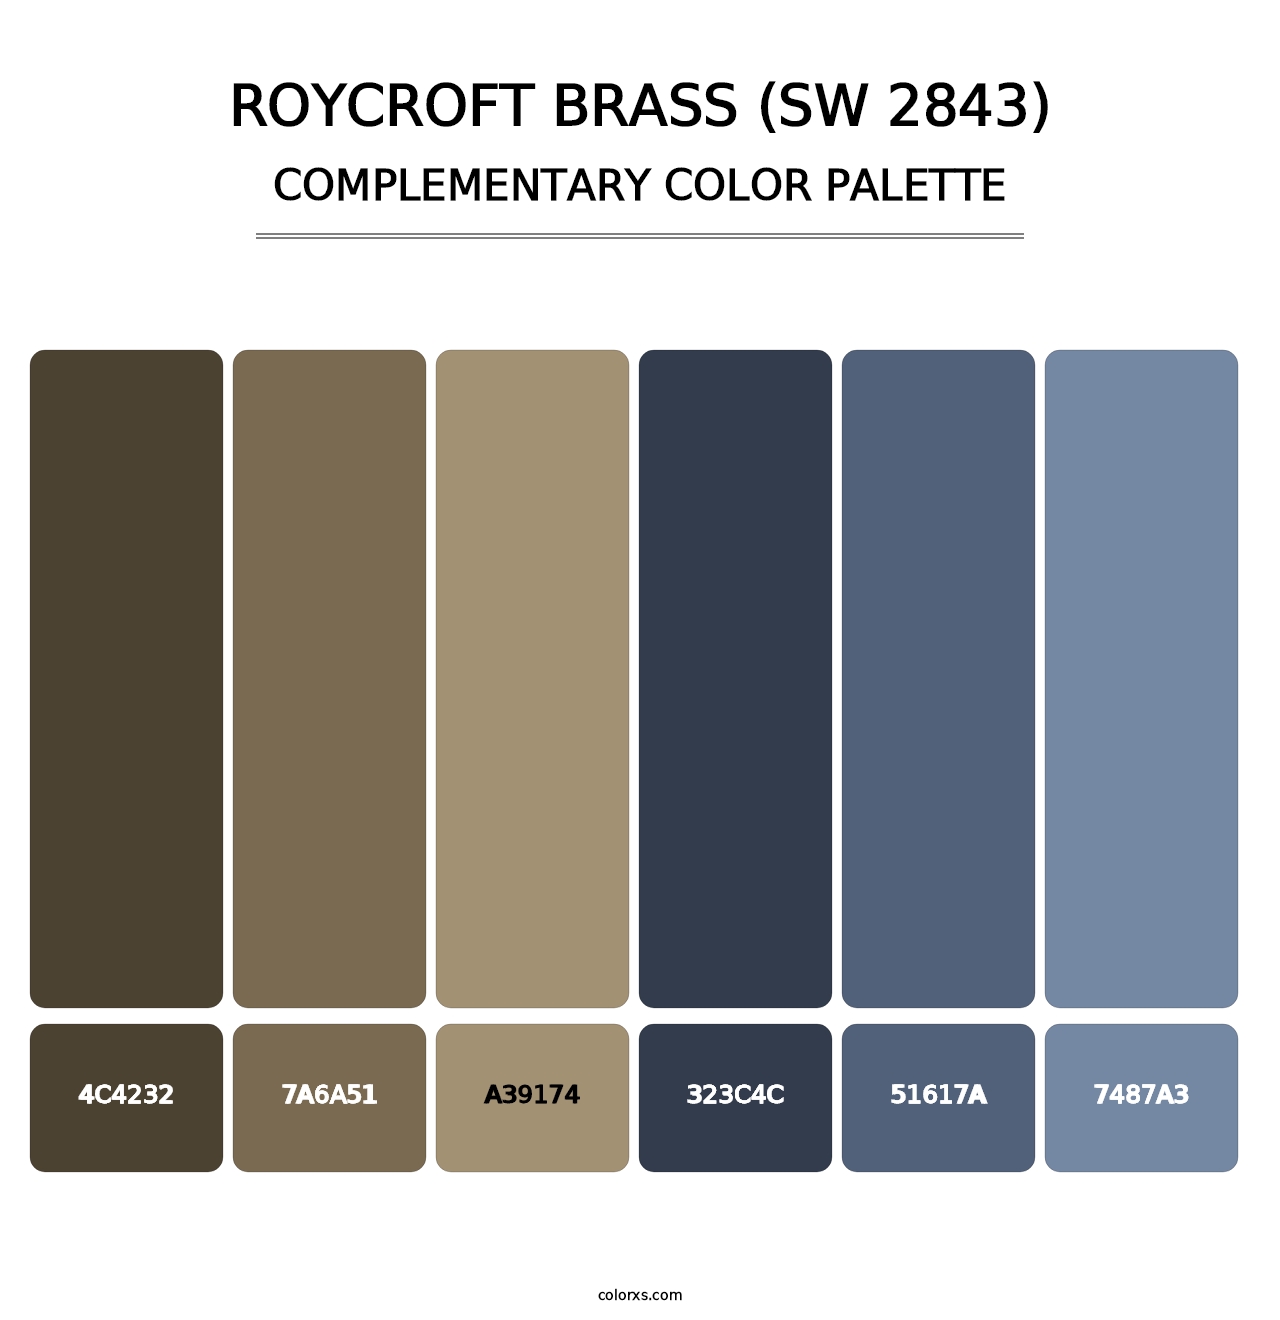 Roycroft Brass (SW 2843) - Complementary Color Palette